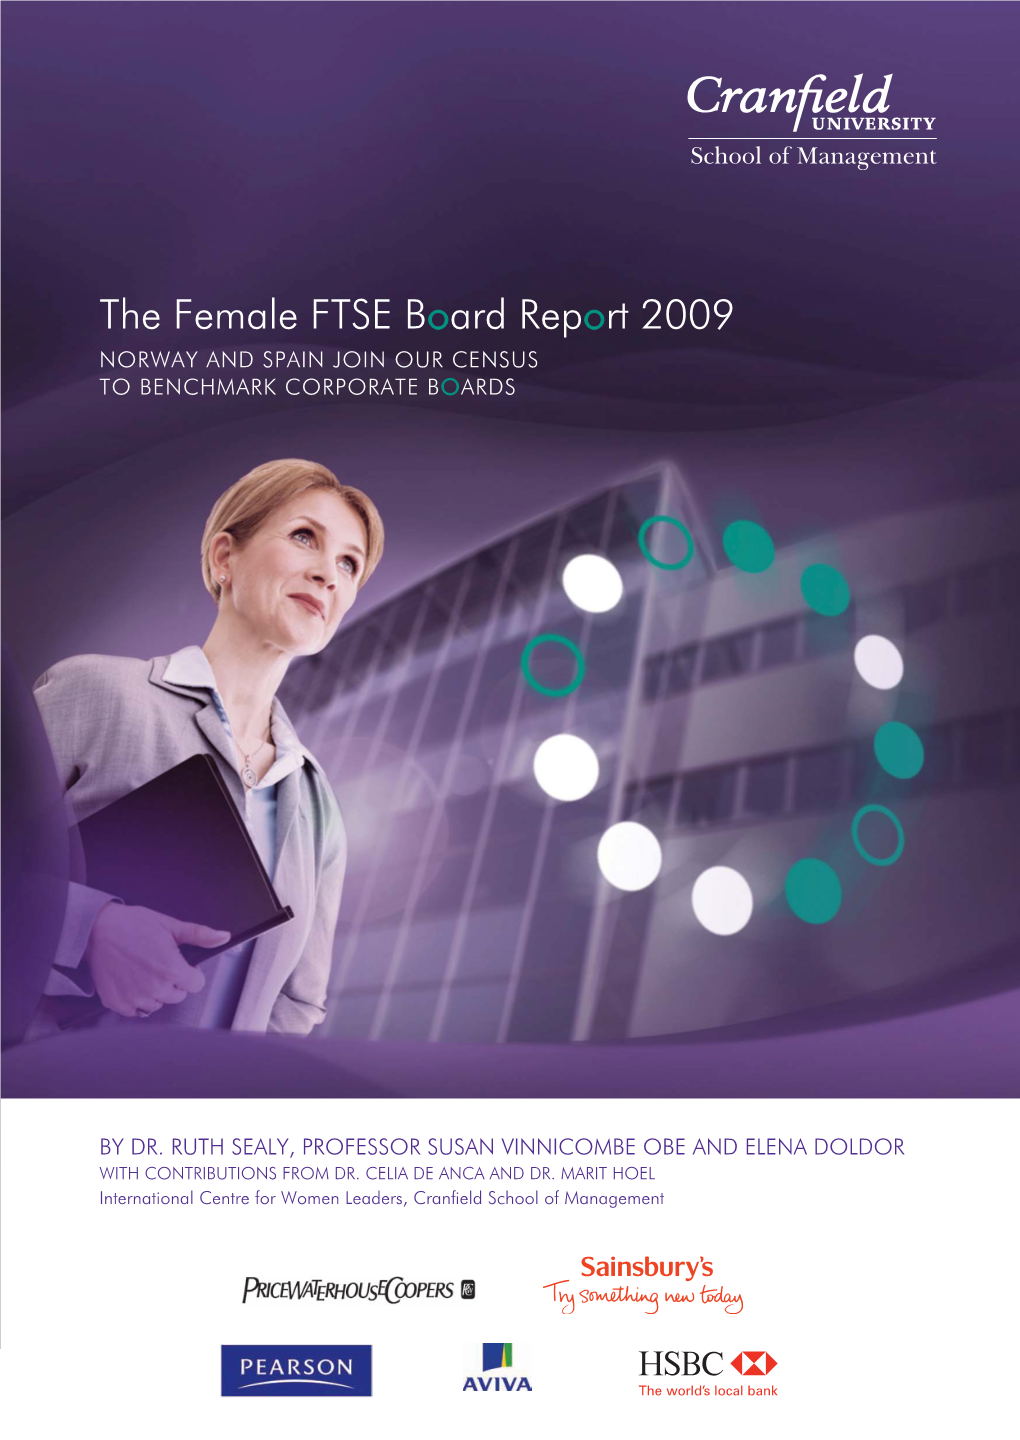 The Female FTSE Board Report 2009 NORWAY and SPAIN JOIN OUR CENSUS to BENCHMARK CORPORATE BOARDS